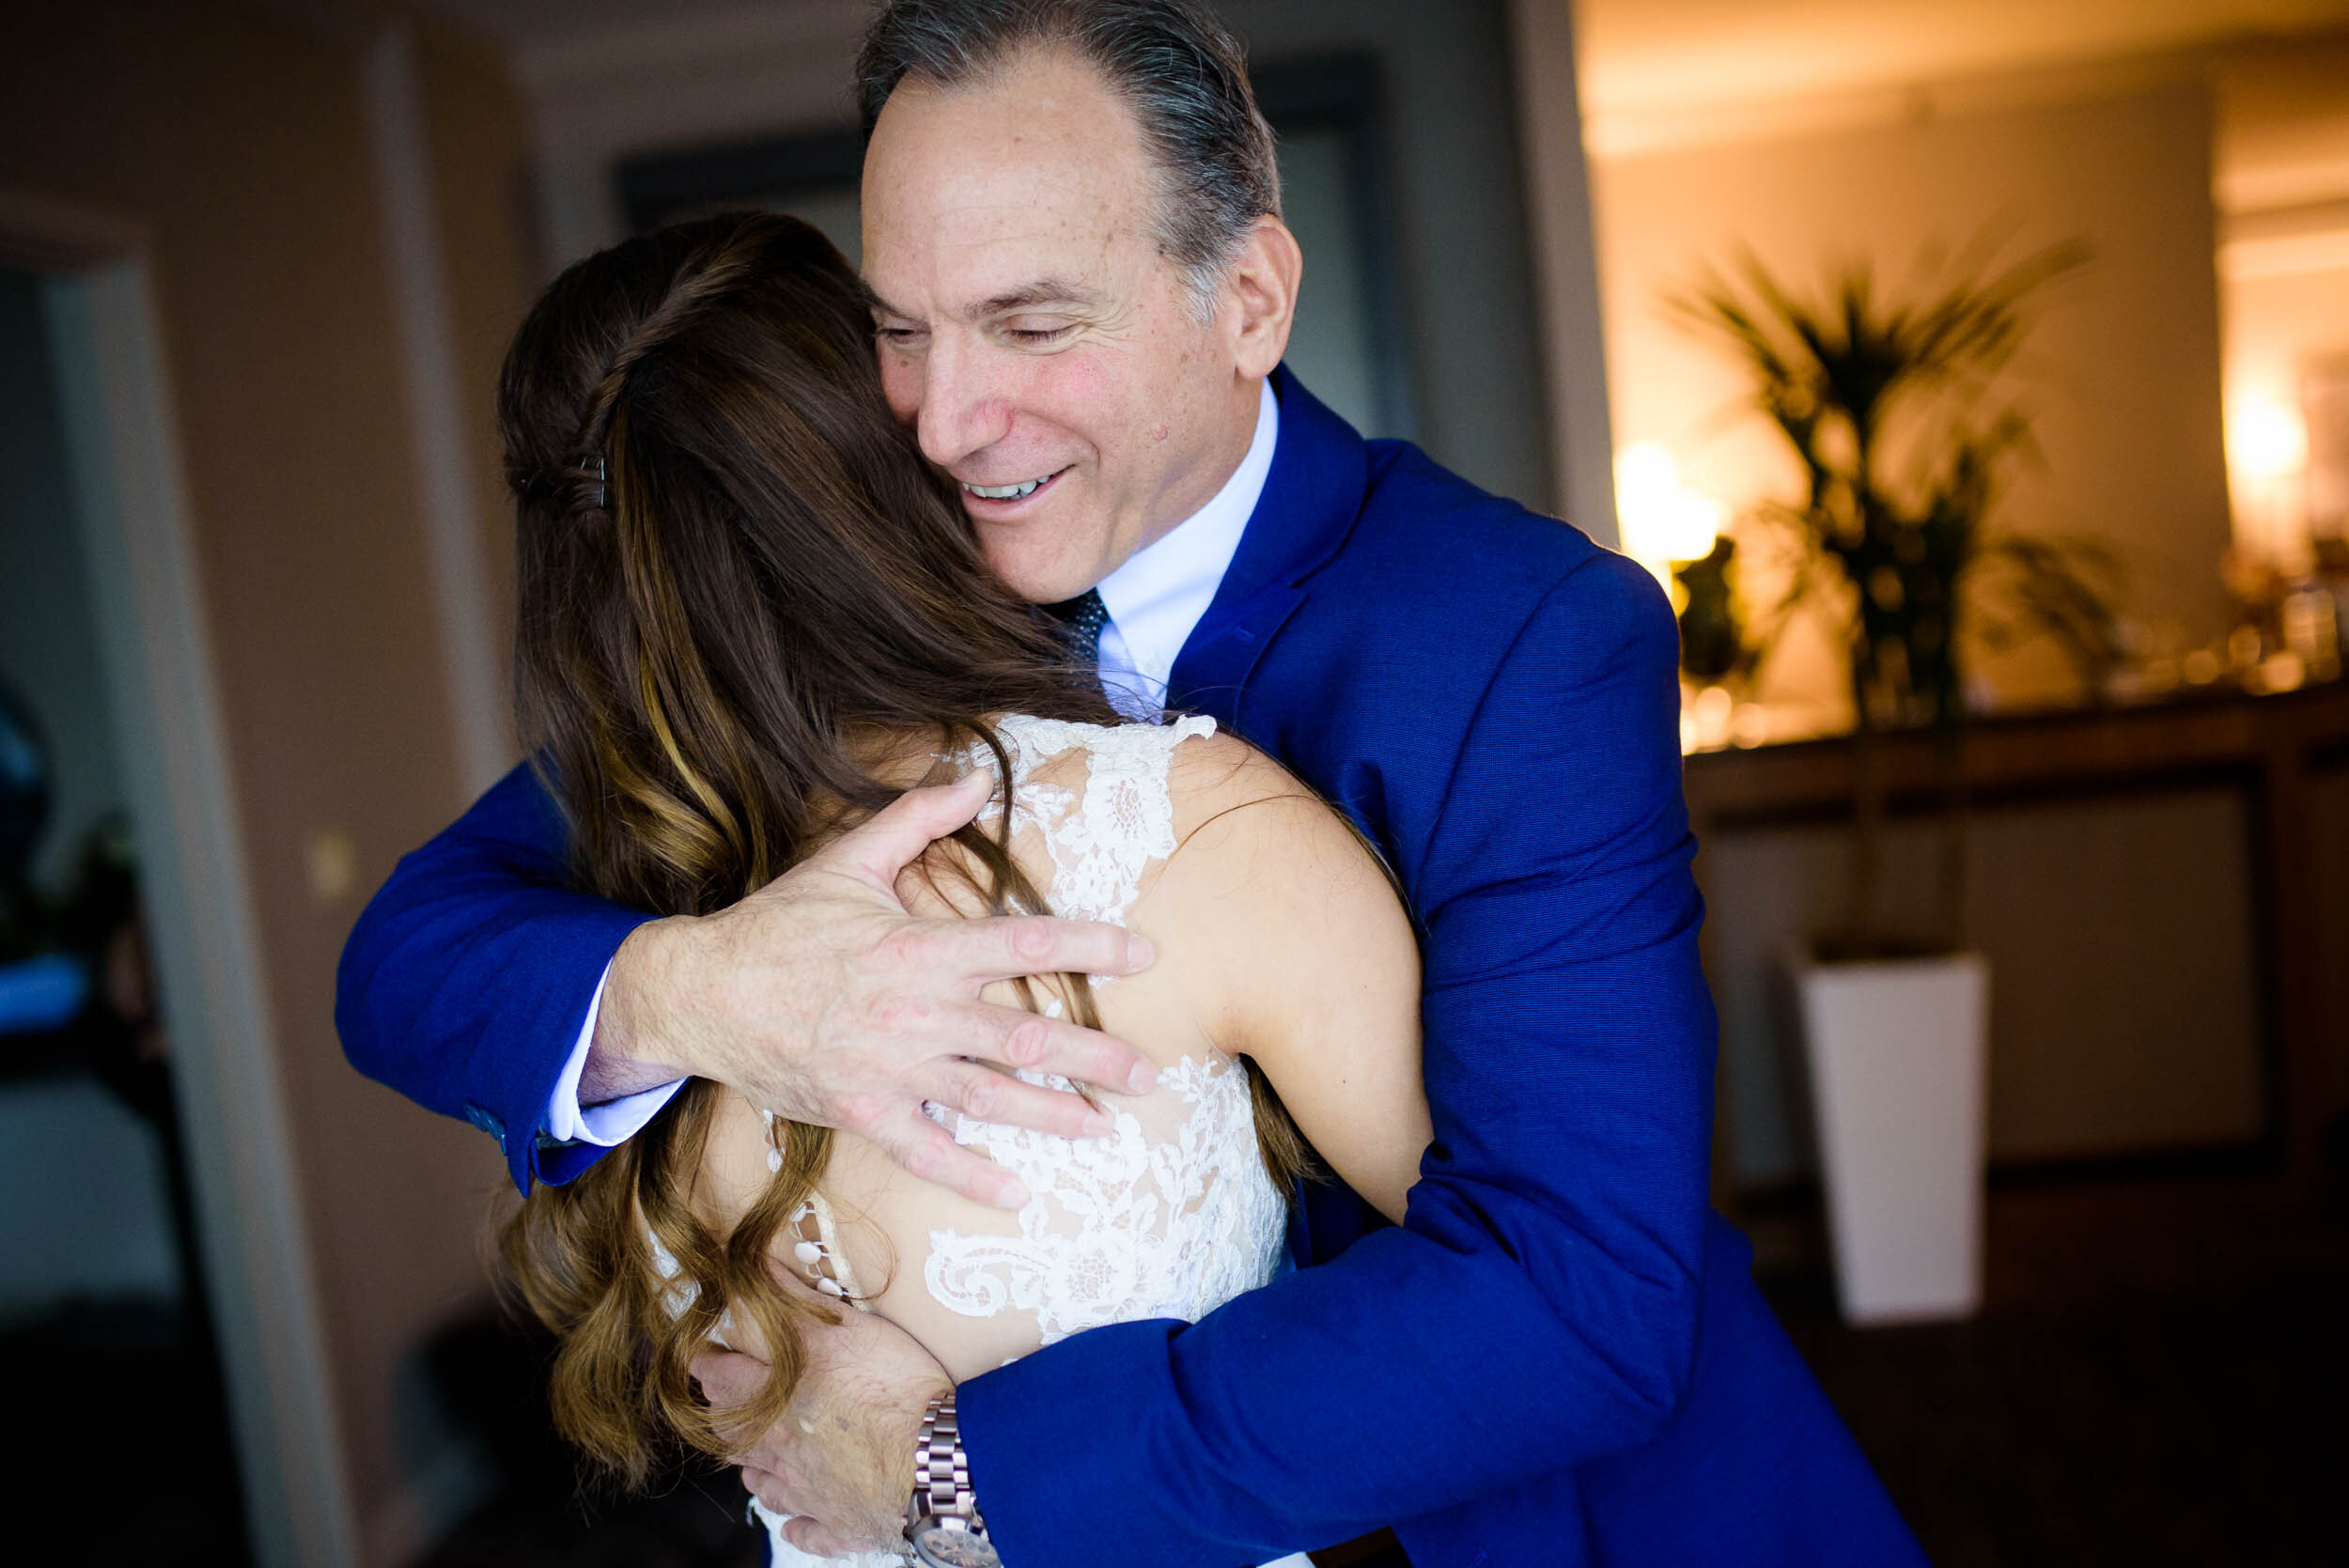 Father and daughter hug while getting ready on the wedding day: Ravenswood Event Center Chicago wedding captured by J. Brown Photography.  